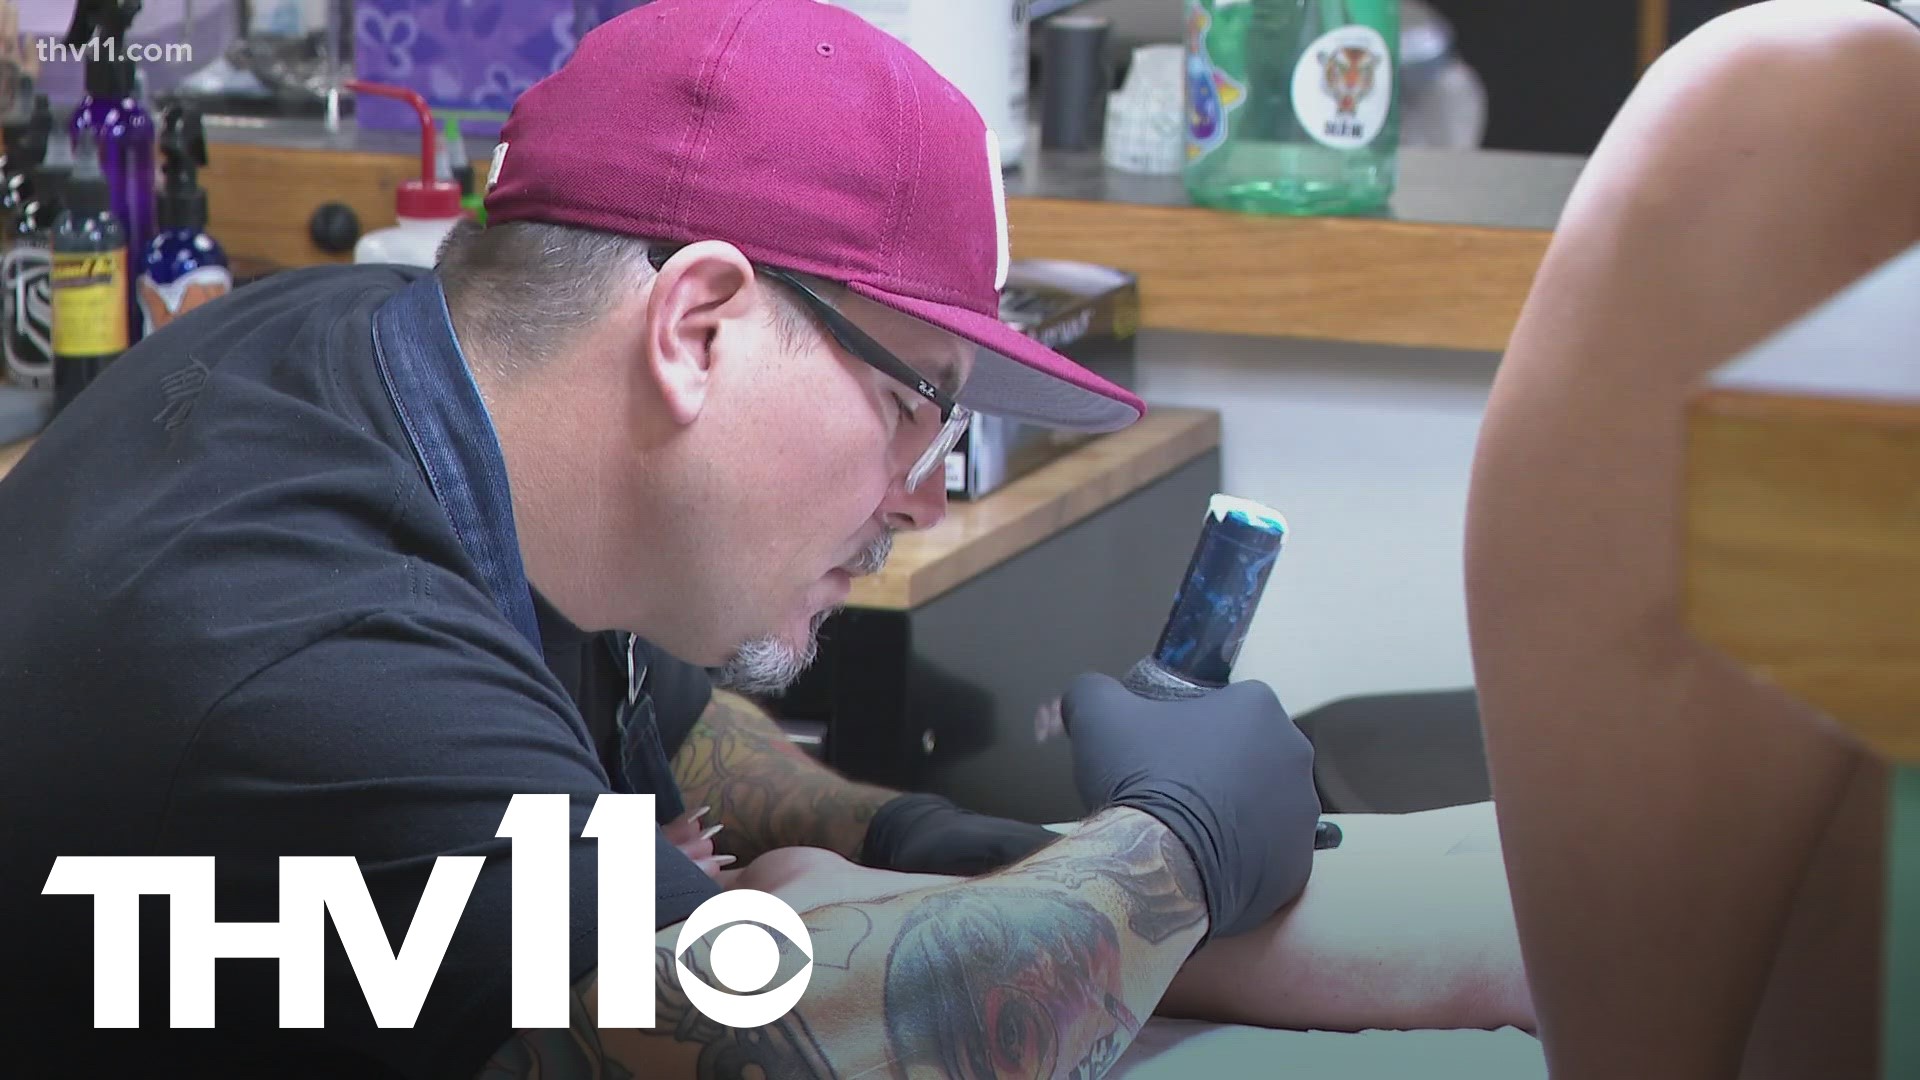 Scammers are pretending to be tattoo shops and artists on social media, asking for deposits before they do the tattoo.